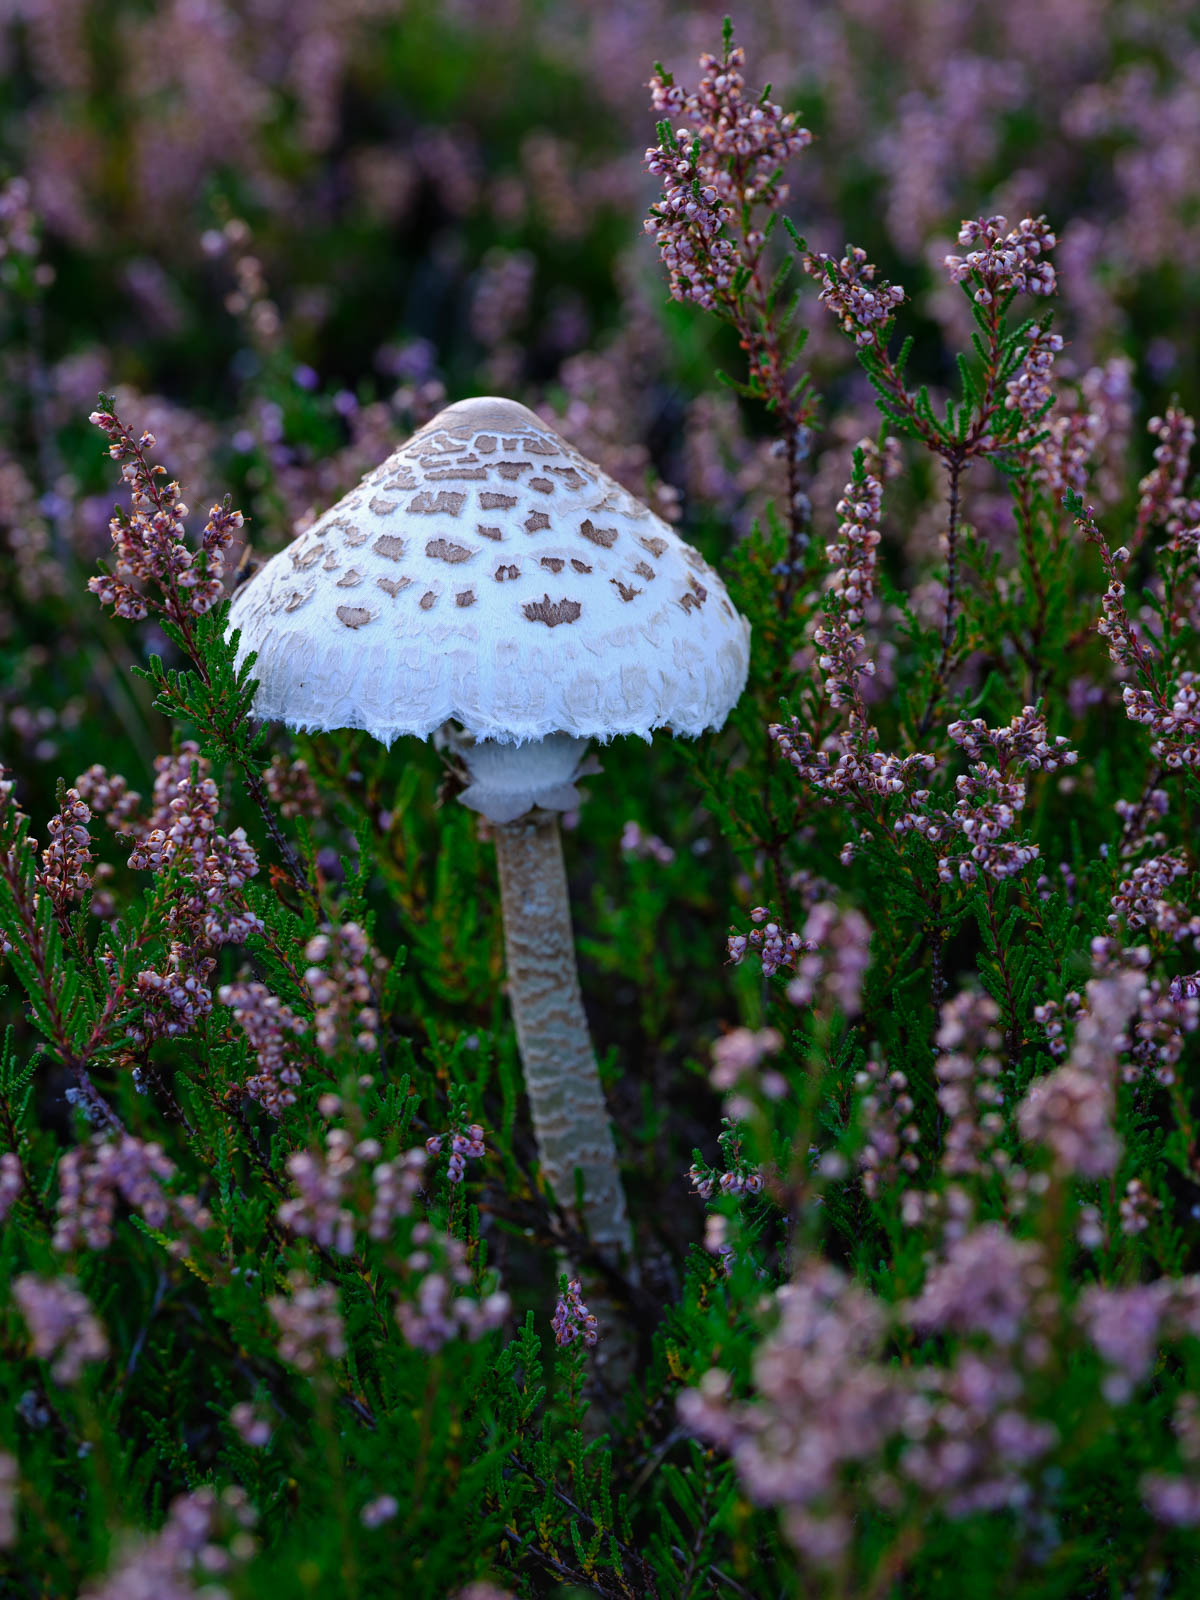 Parasol mushrooms in the morning light shortly before sunrise in the Teutoburg Forest (Germany).